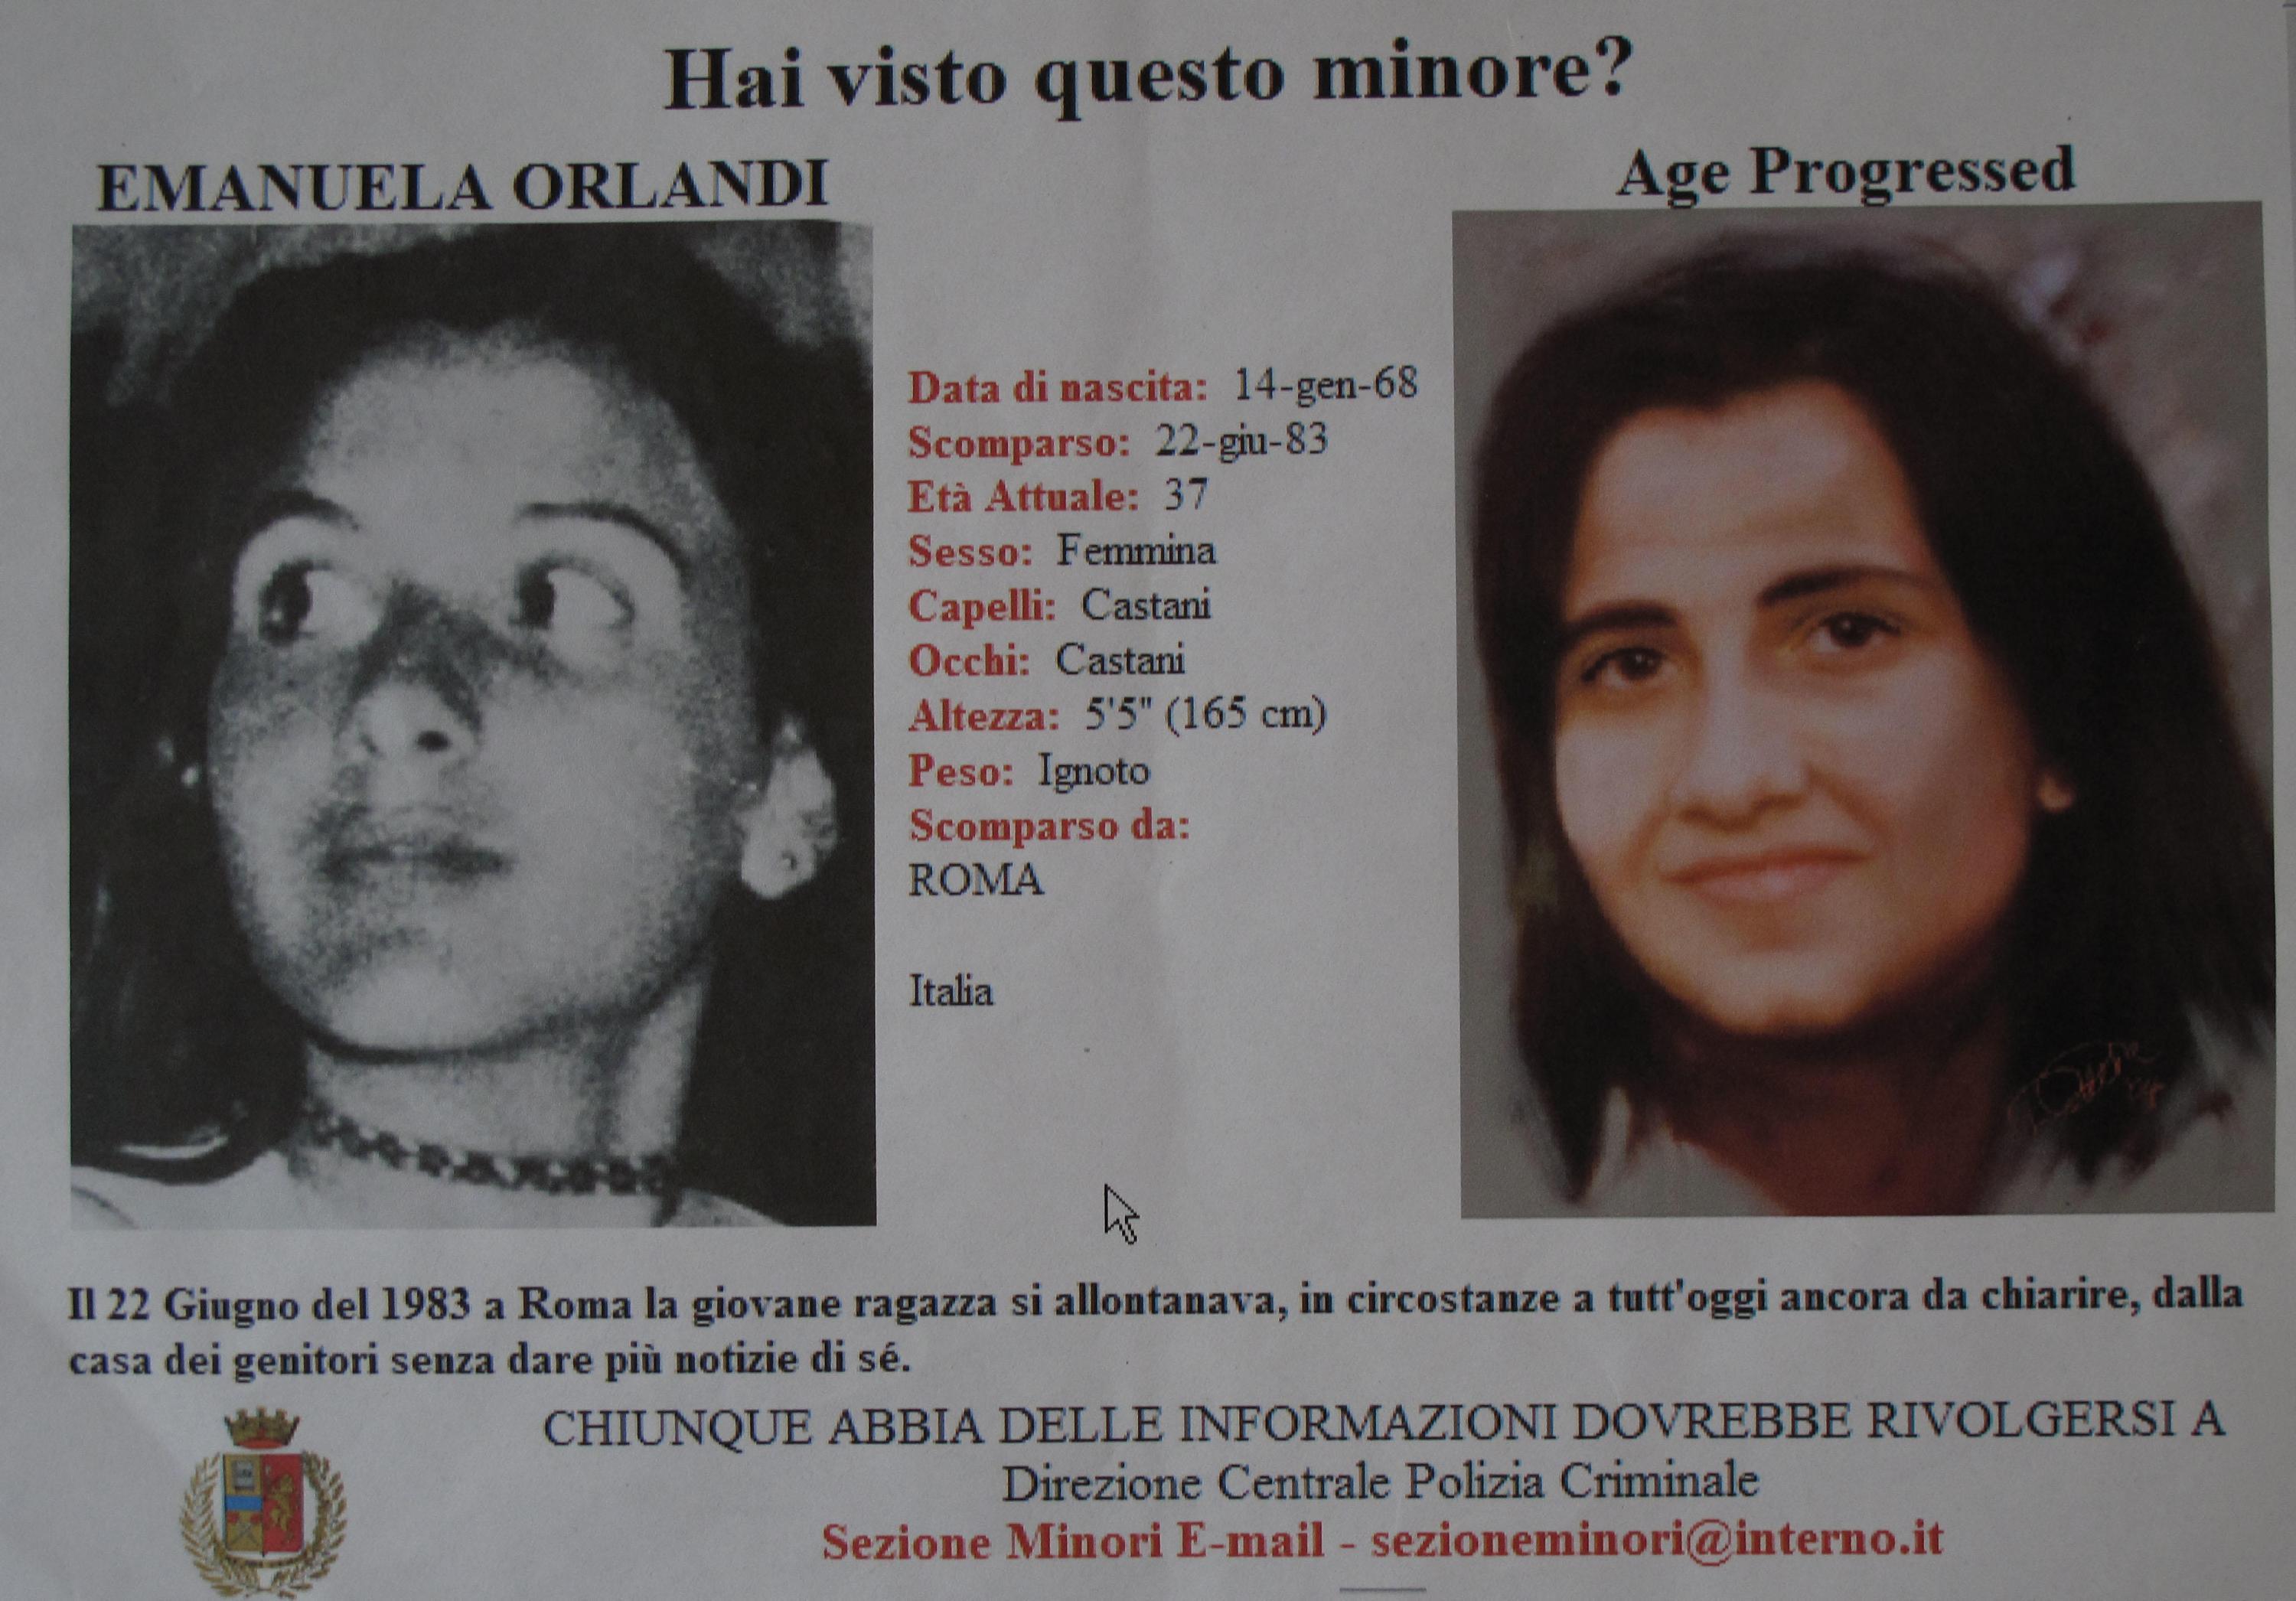 Vatican to open two tombs in hope of finding missing teenager's body 